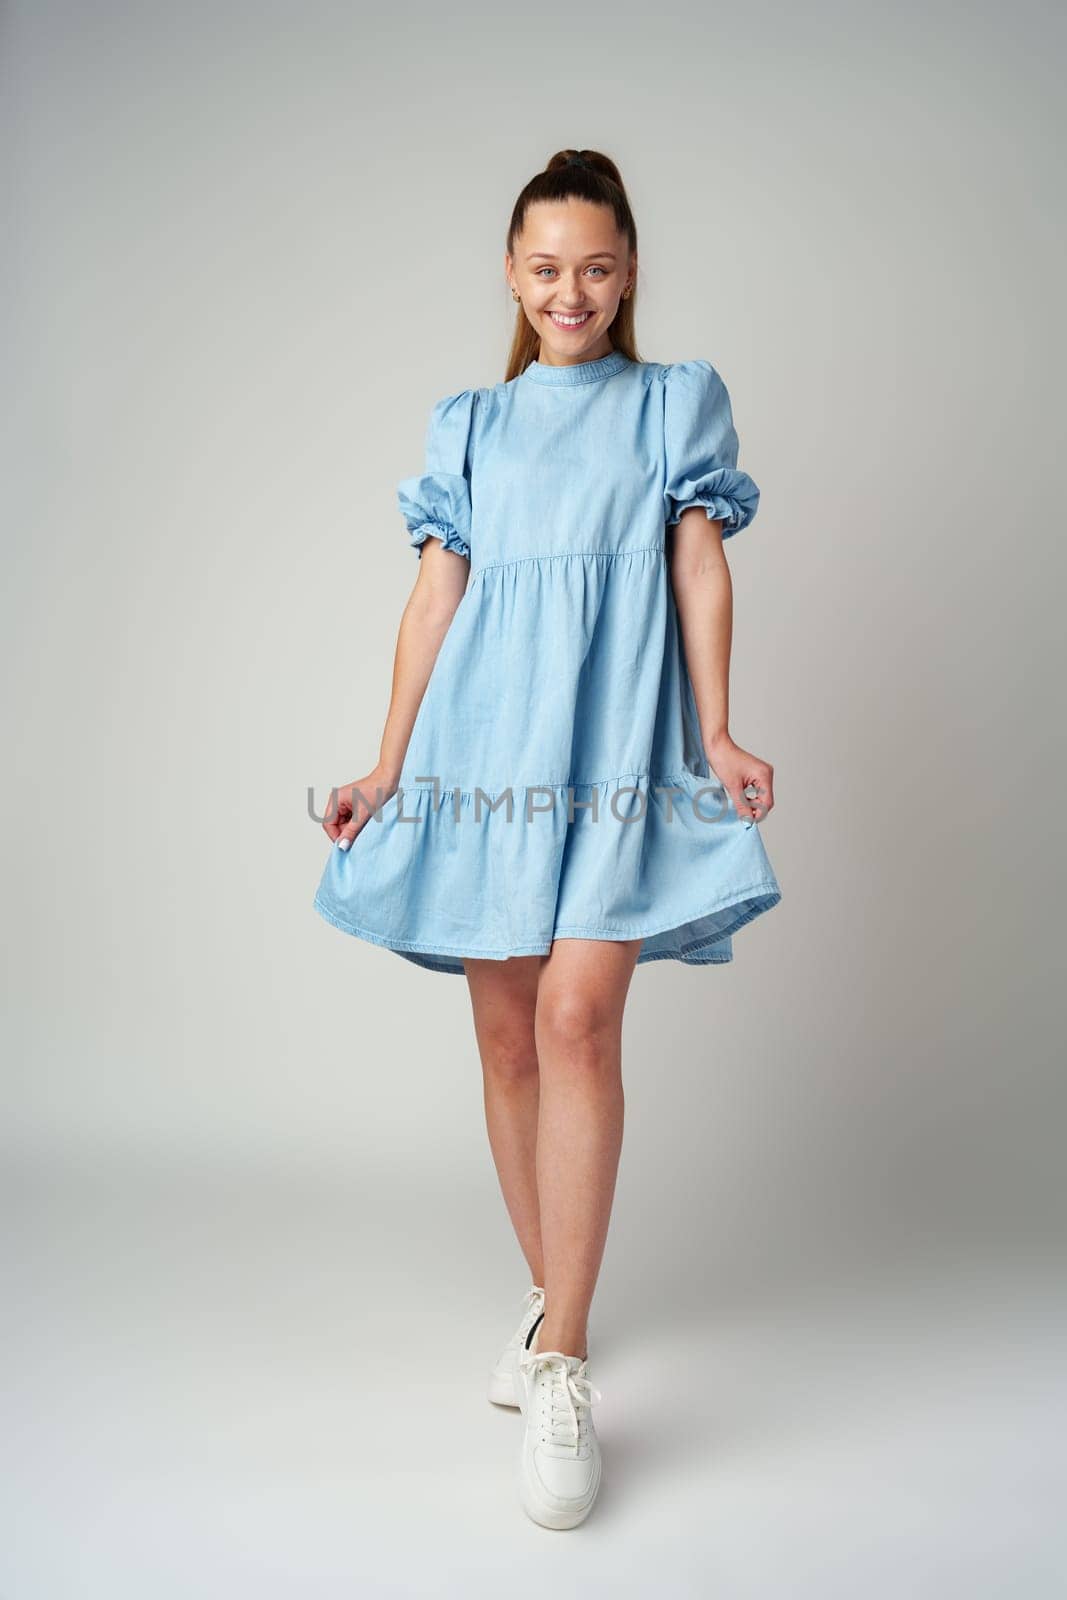 Young happy smiling woman in a light blue dress on a gray background by Fabrikasimf